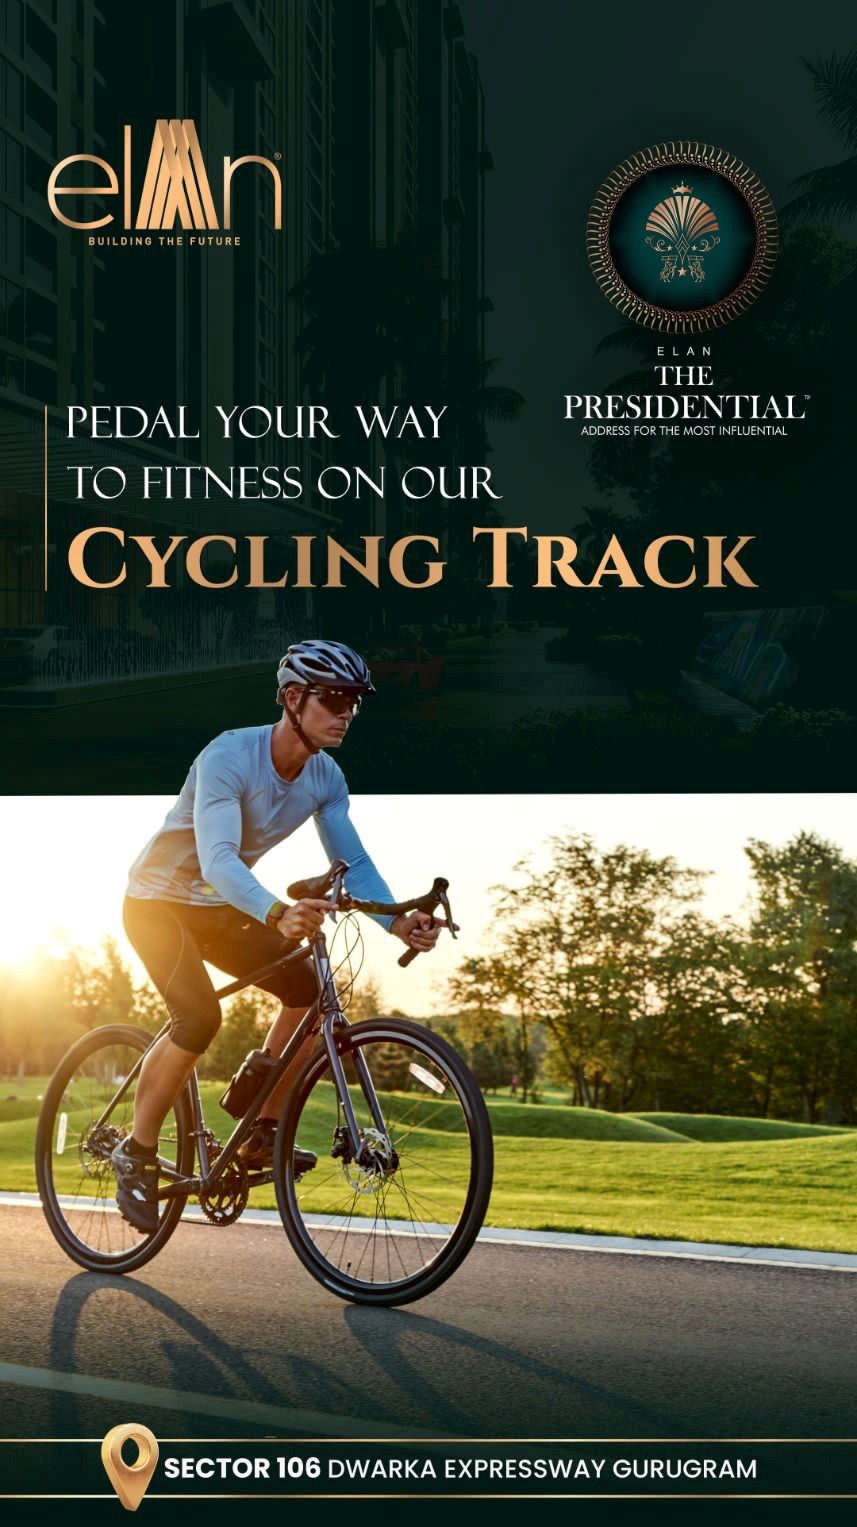 Pedal your way to fitness on our cycling track at Elan The Presidential, Gurgaon Update